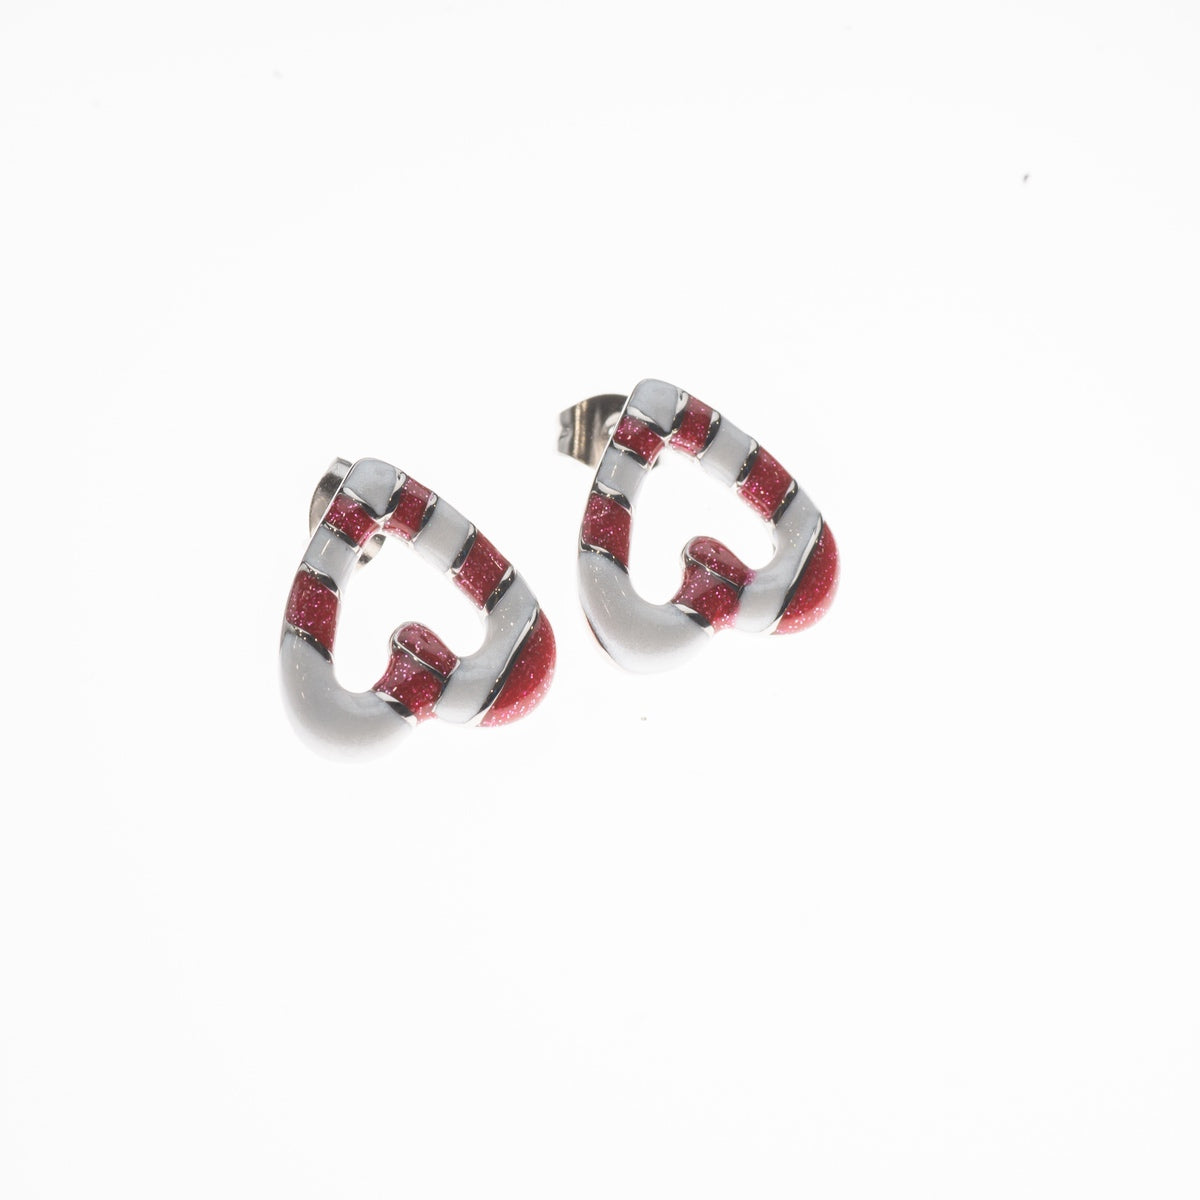 A-MORE Candy Love - Stud earrings